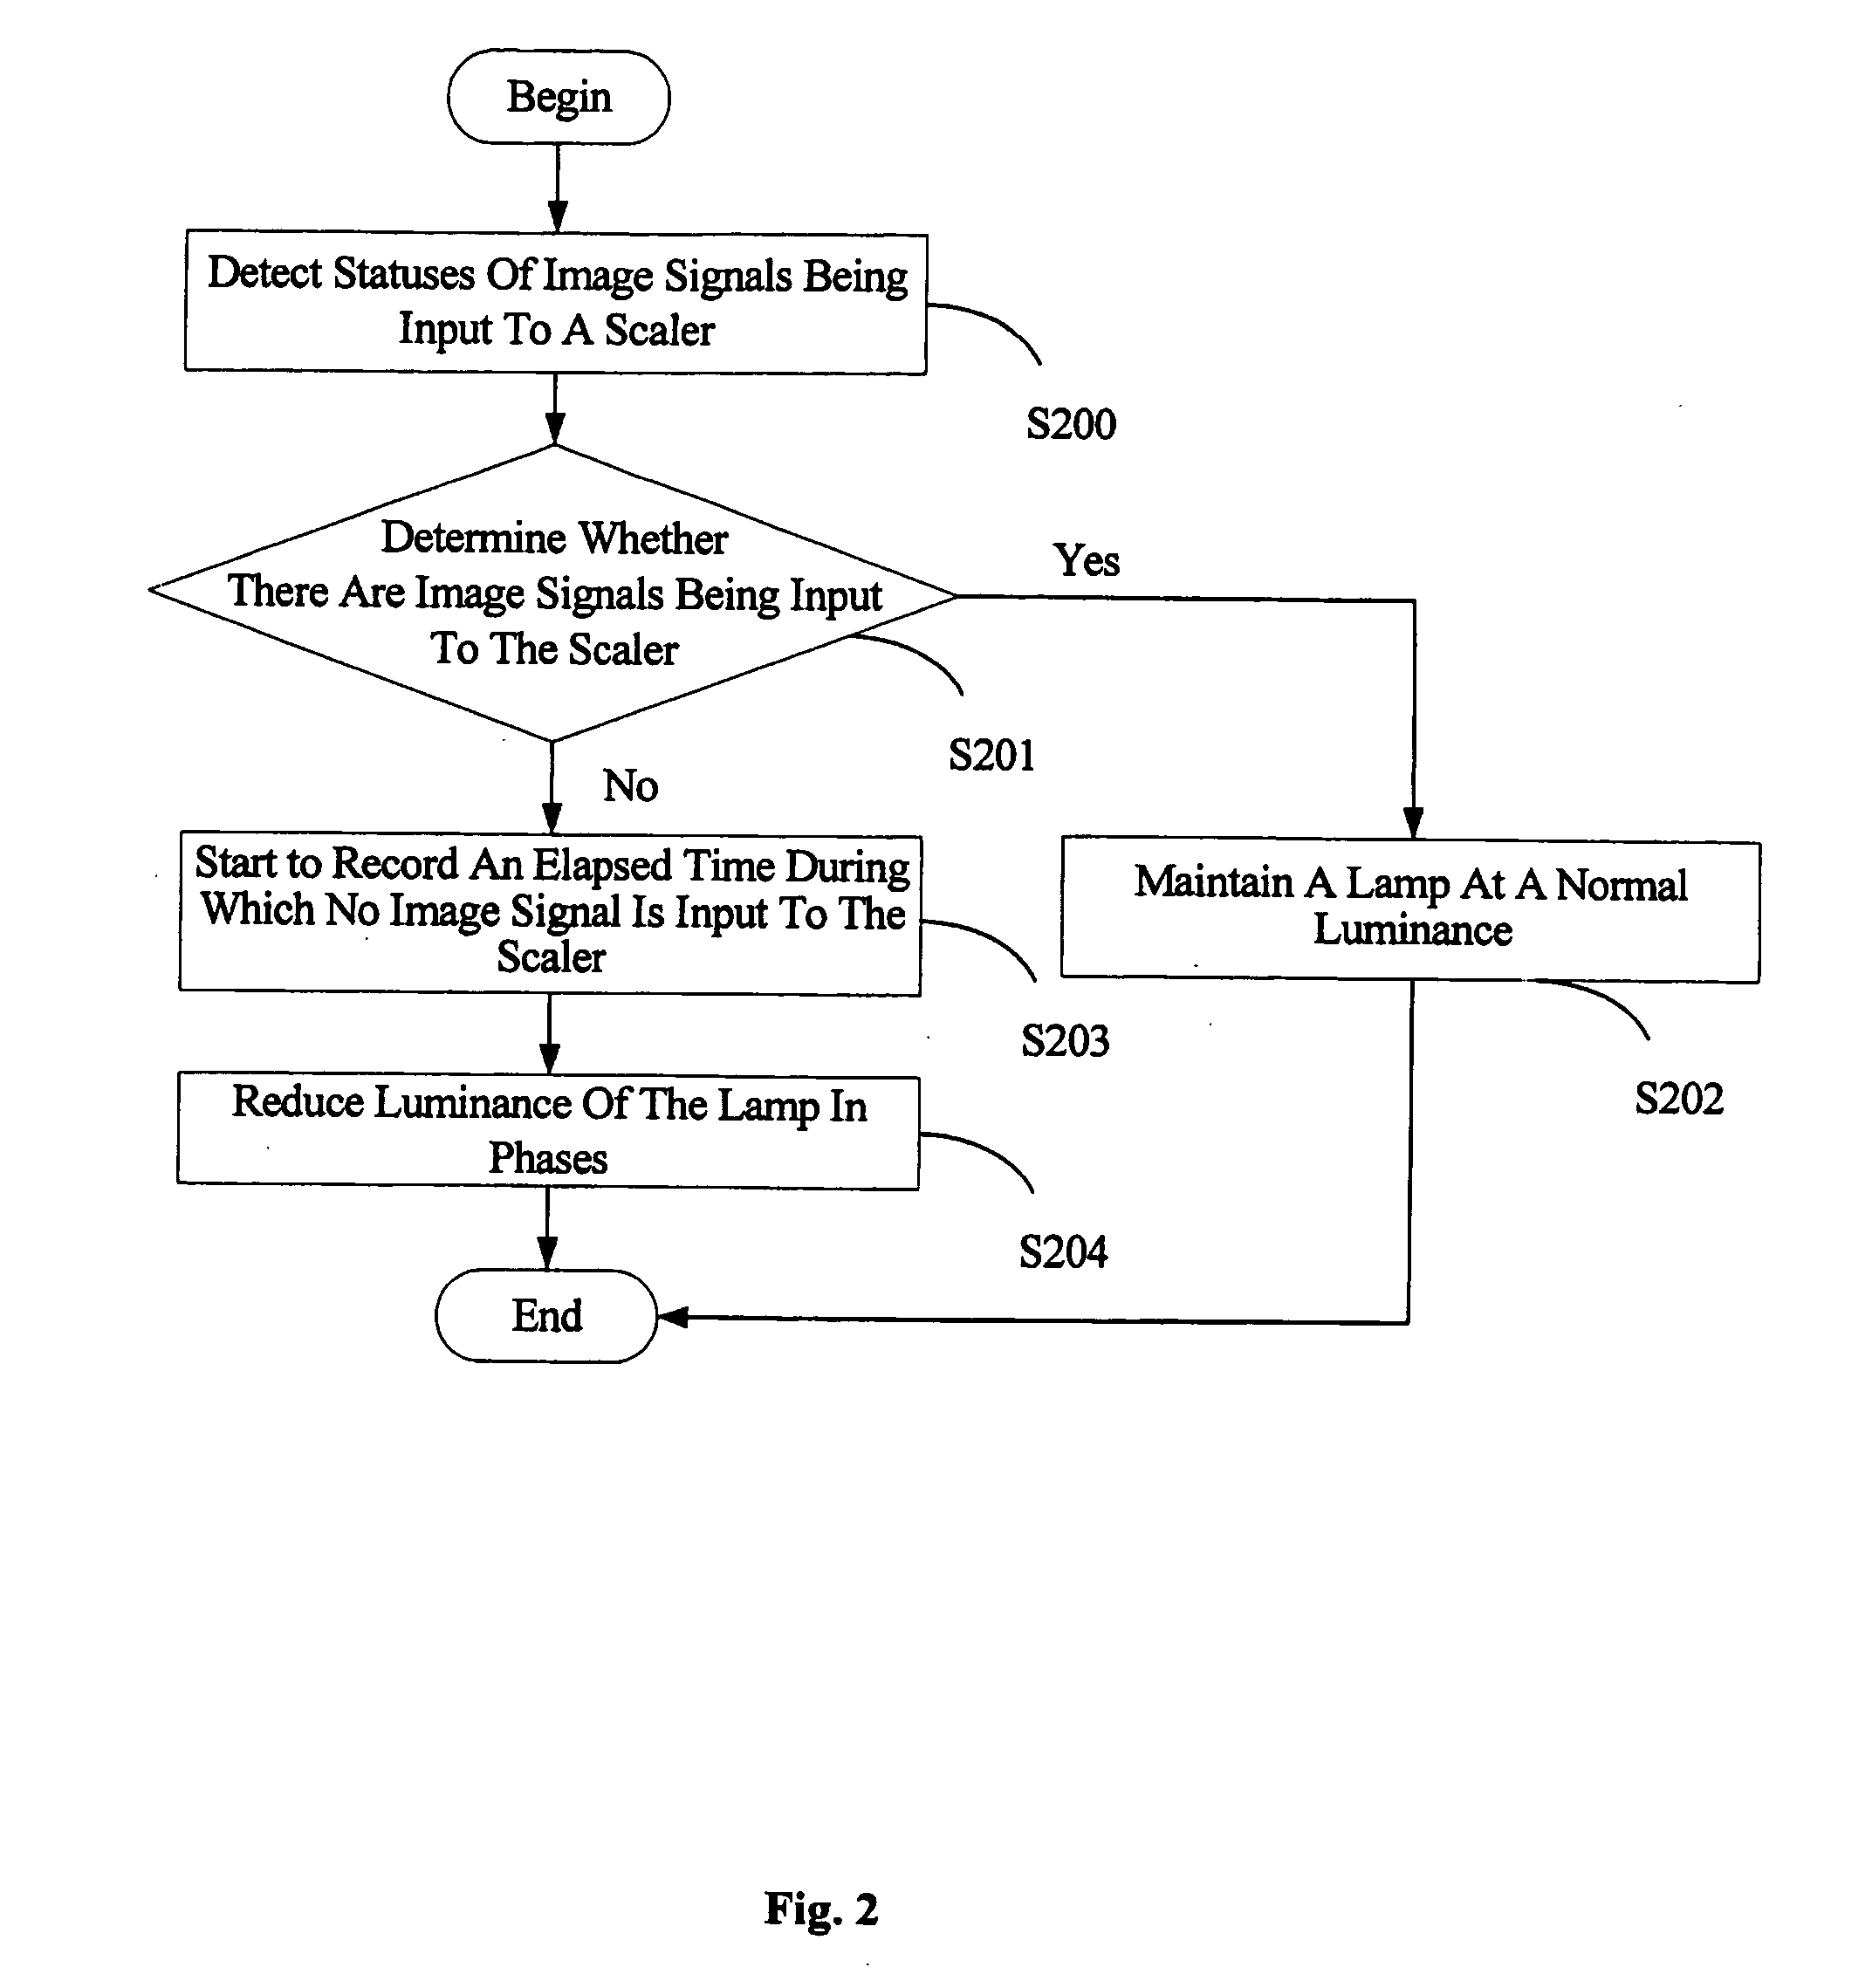 Apparatus and method for prolonging lamp lifetime